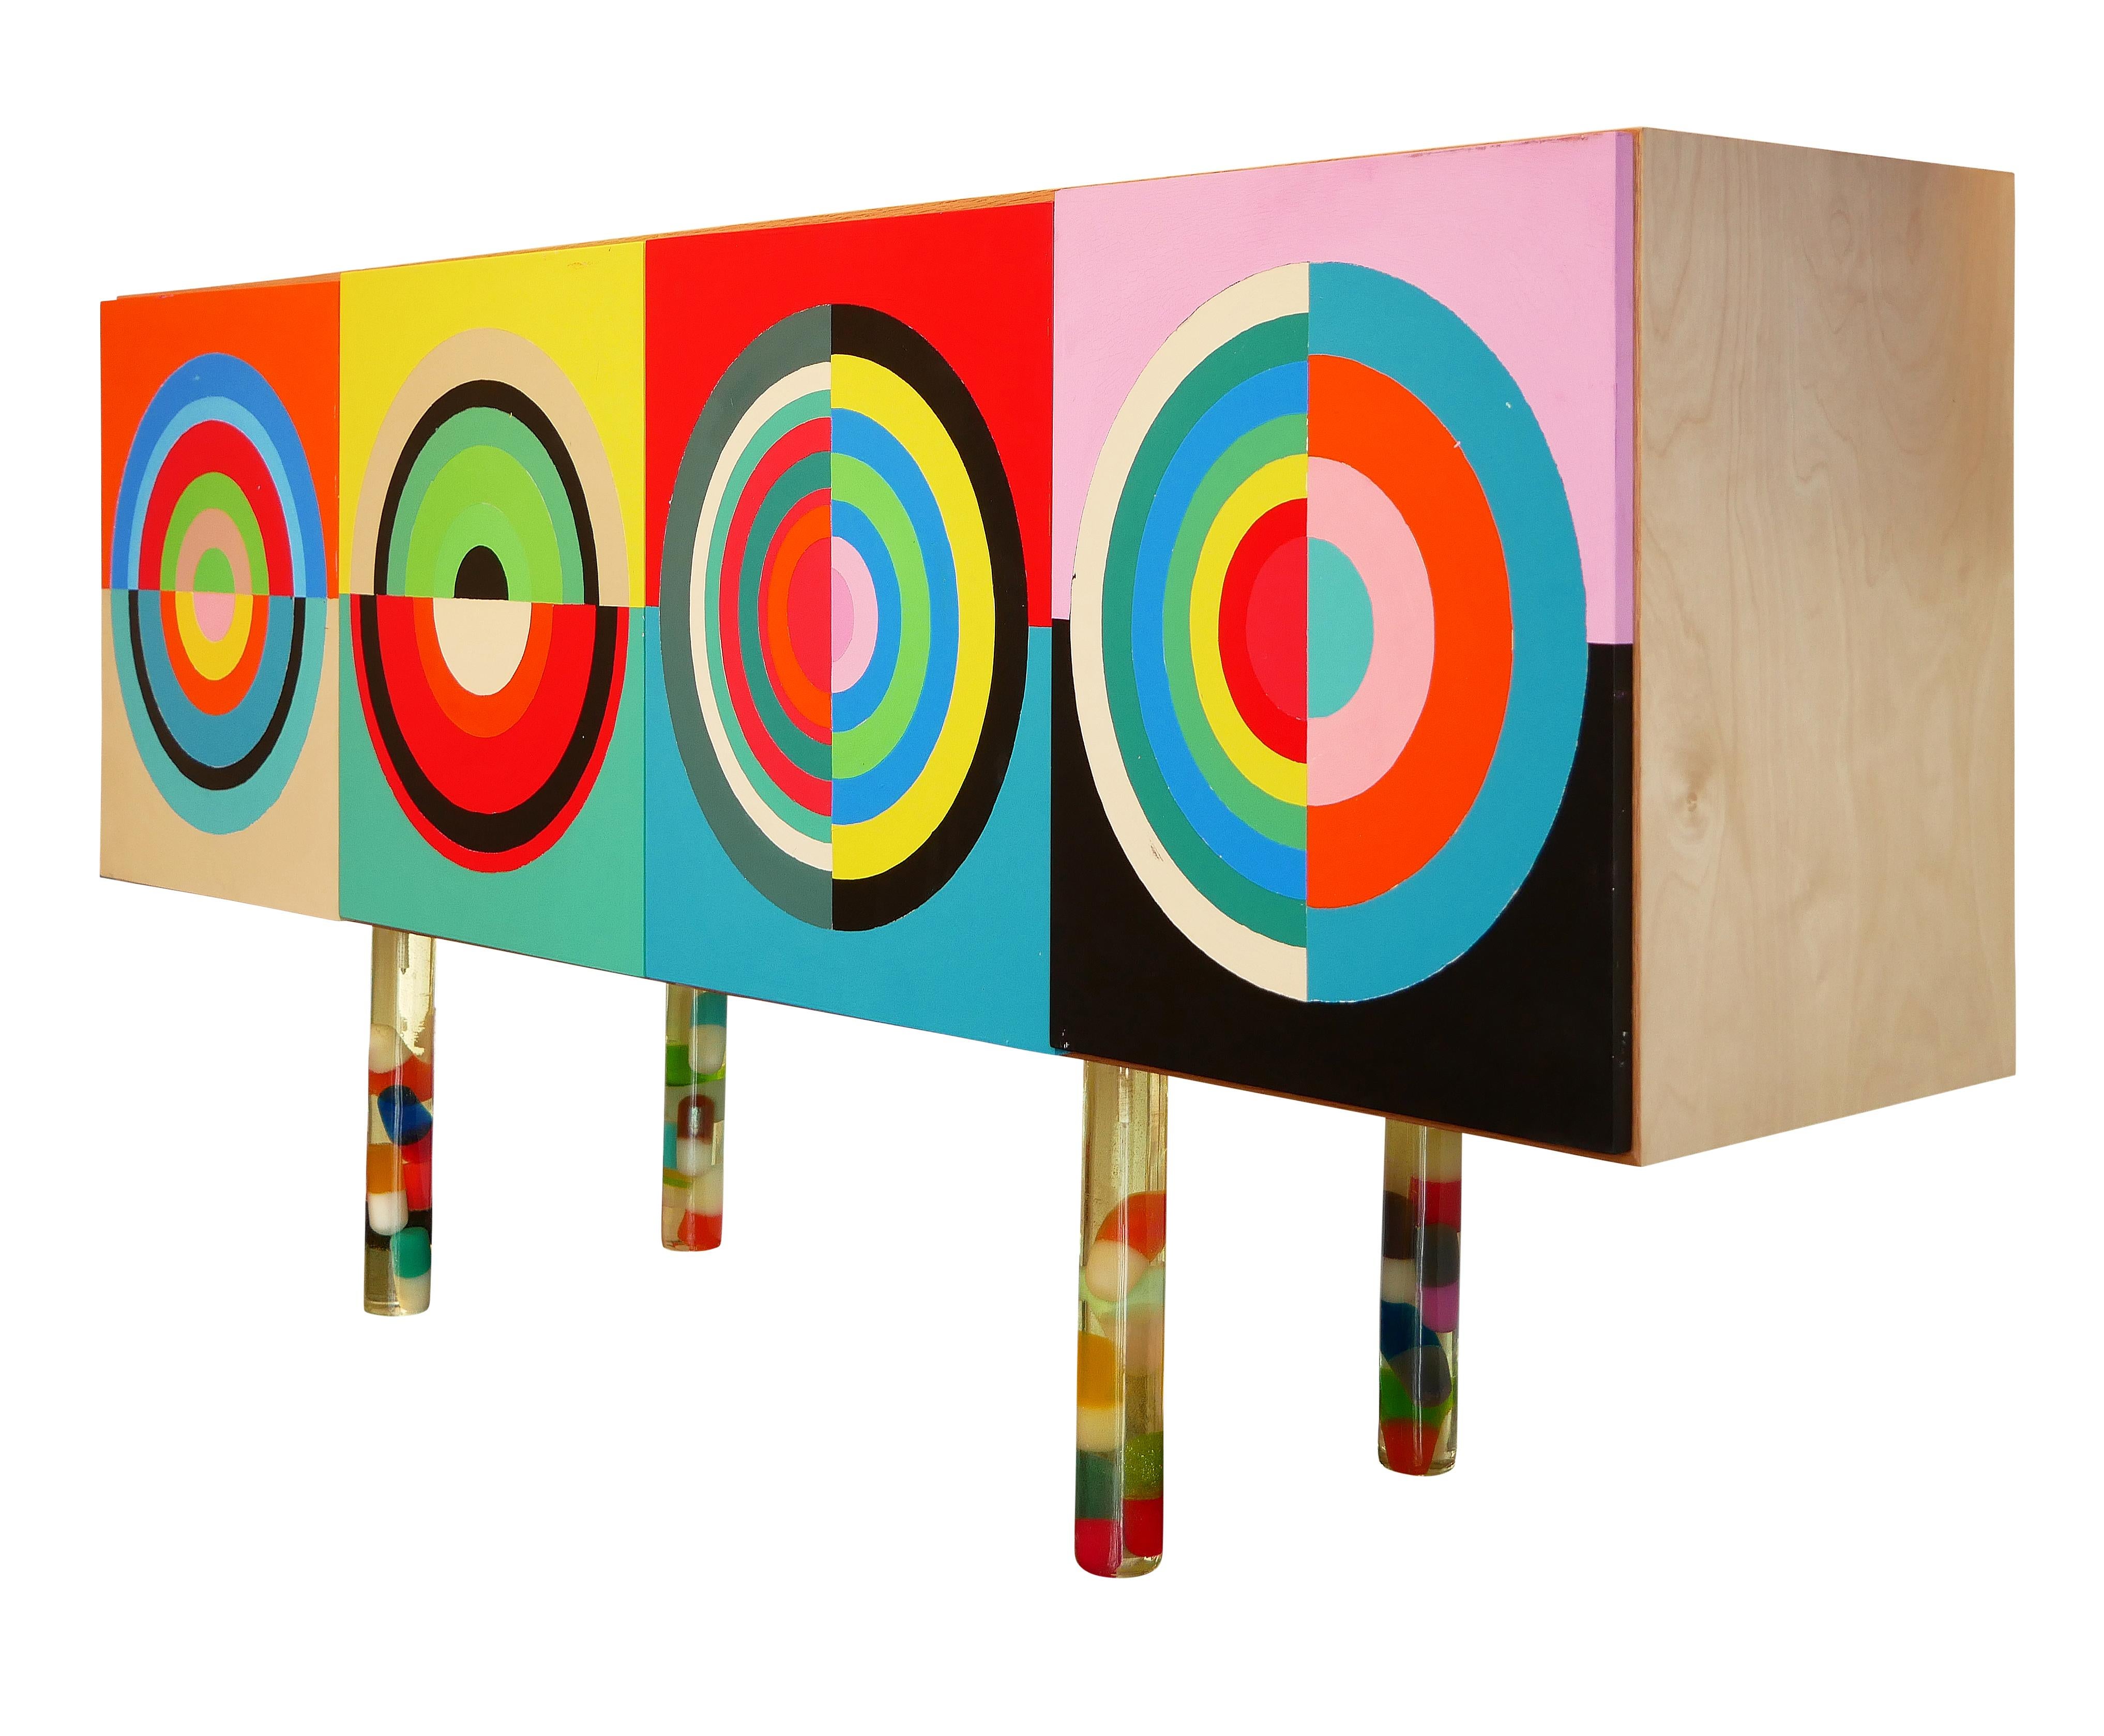 Stunning custom contemporary modern sideboard with colorful abstract paintings by Houston, TX artist Mario Humberto Kazaz. The hand painted door fronts feature four colorful abstract geometric shapes that resemble a target. This sideboard has two